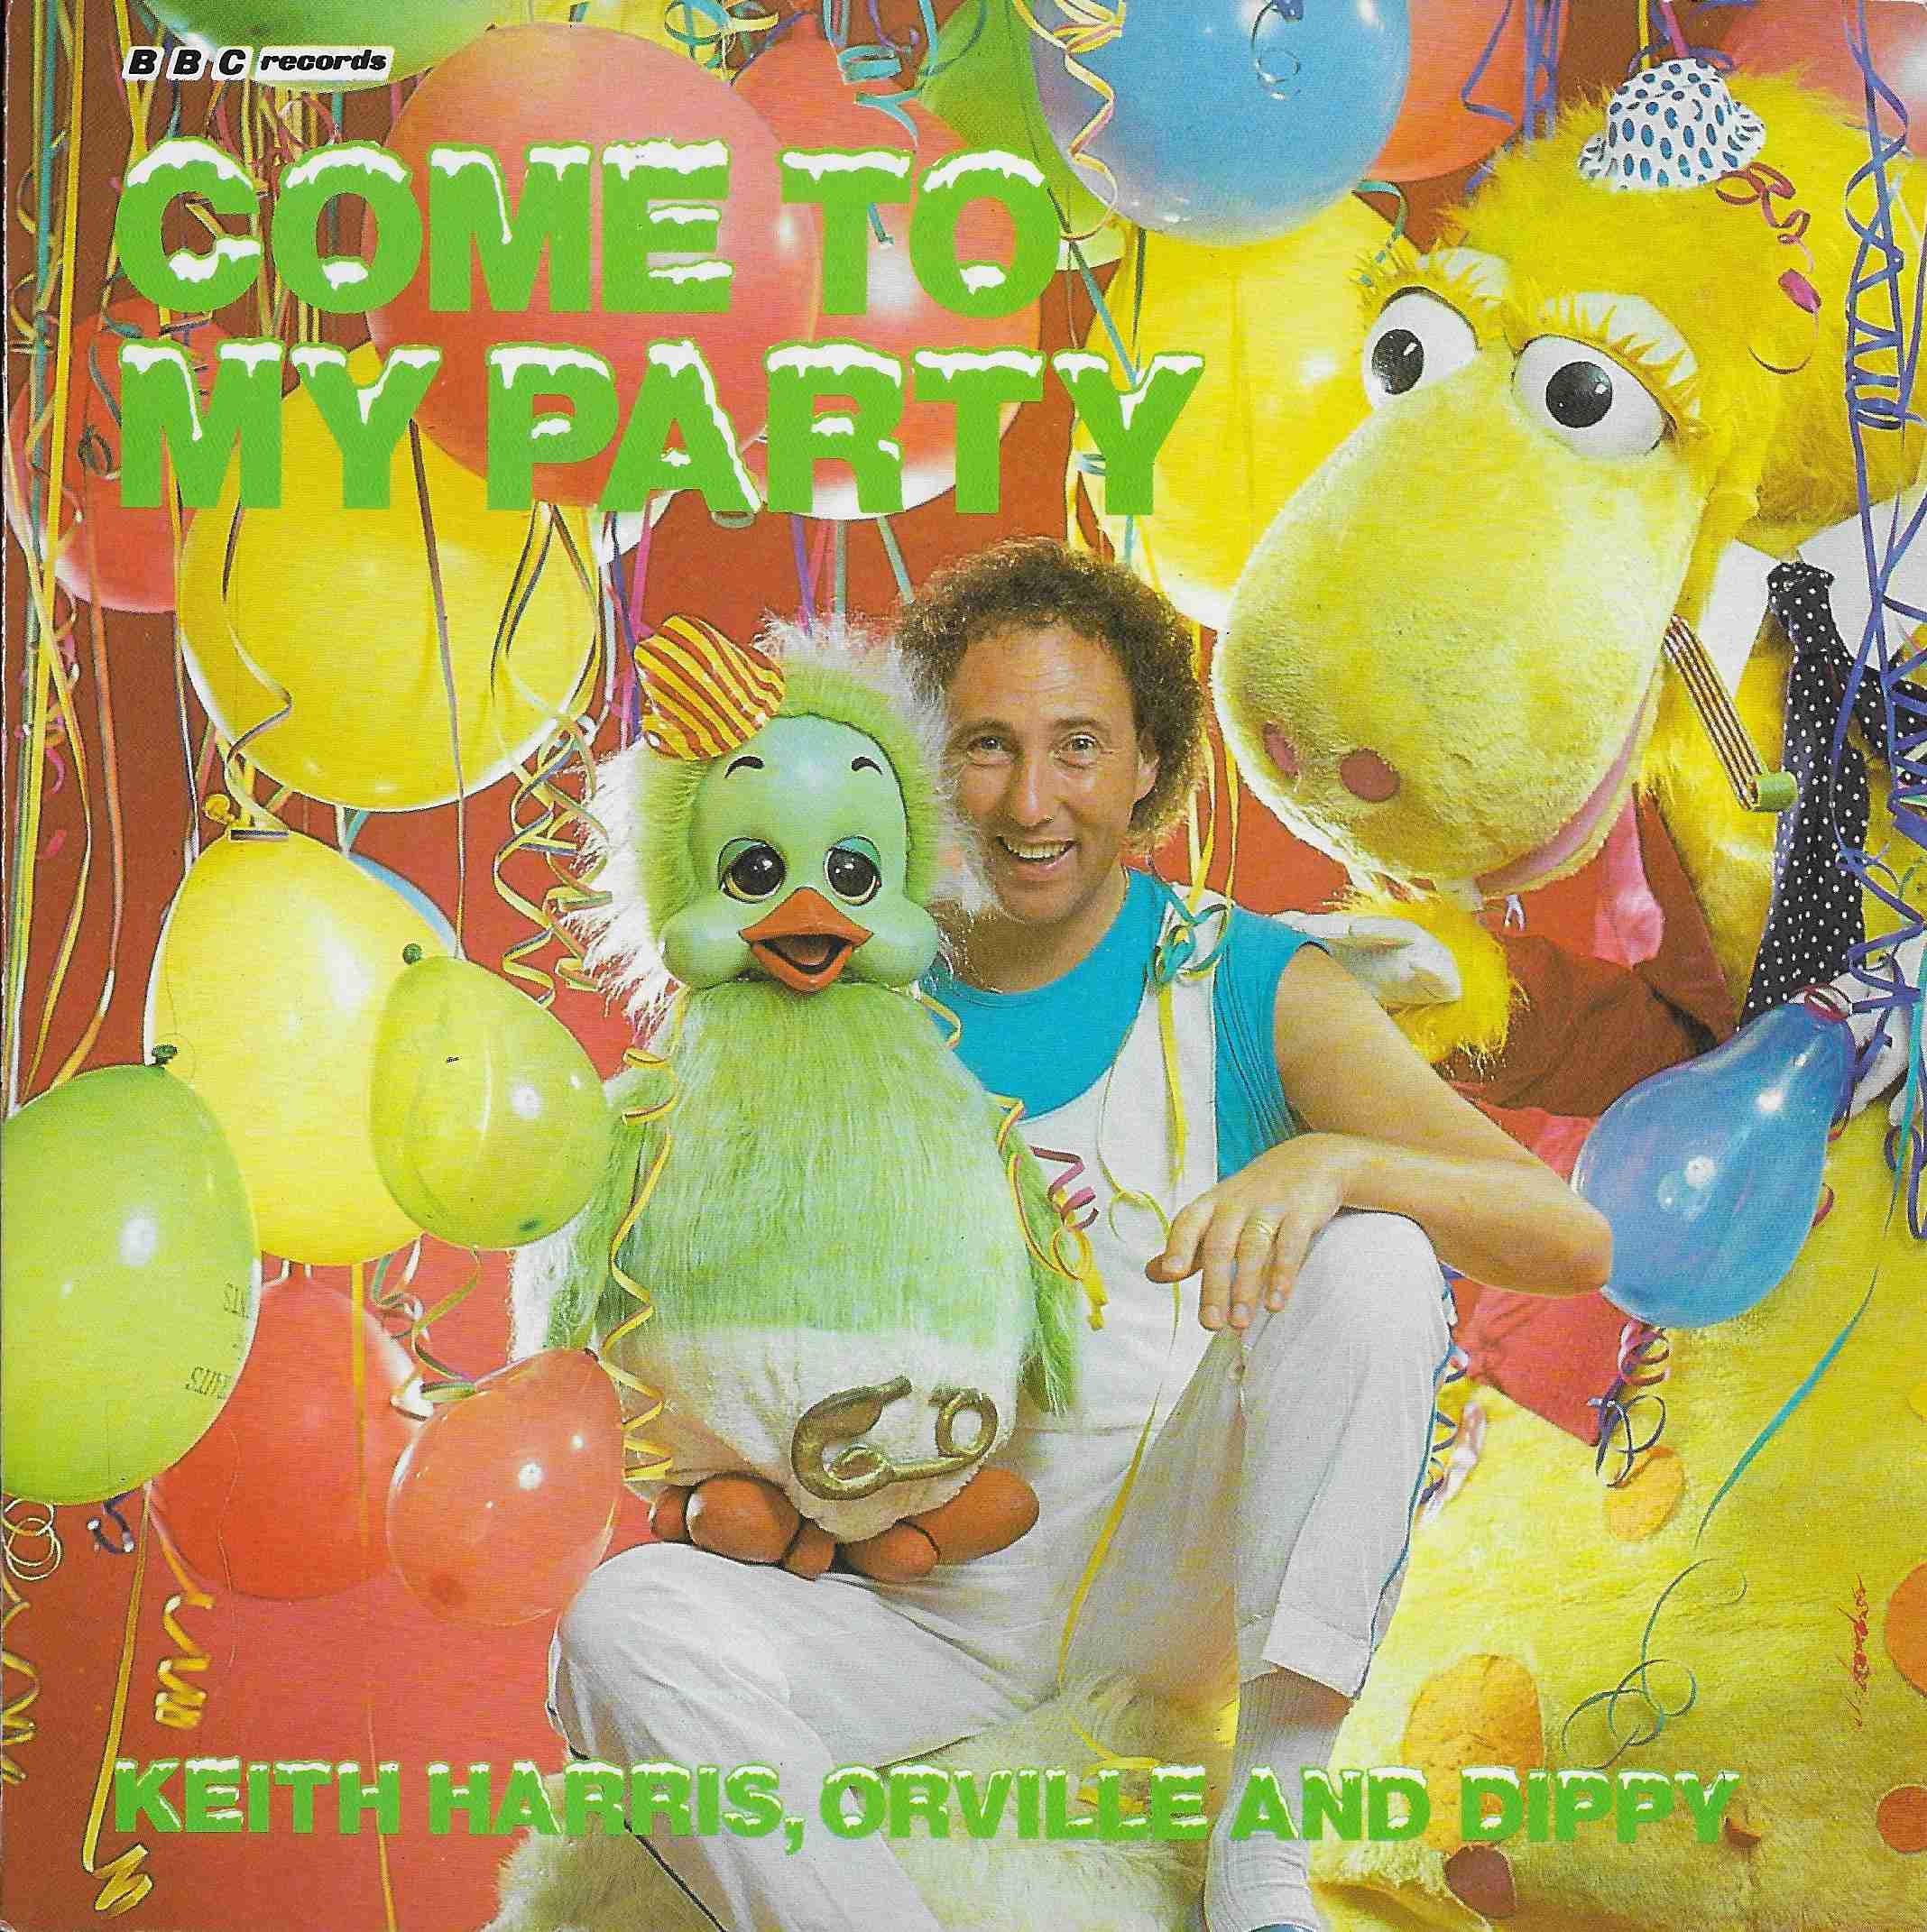 Picture of RESL 138 Come to my party by artist Bobby Crush / Keith Harris, Orville and Dippy / Keith Harris and Orville from the BBC singles - Records and Tapes library